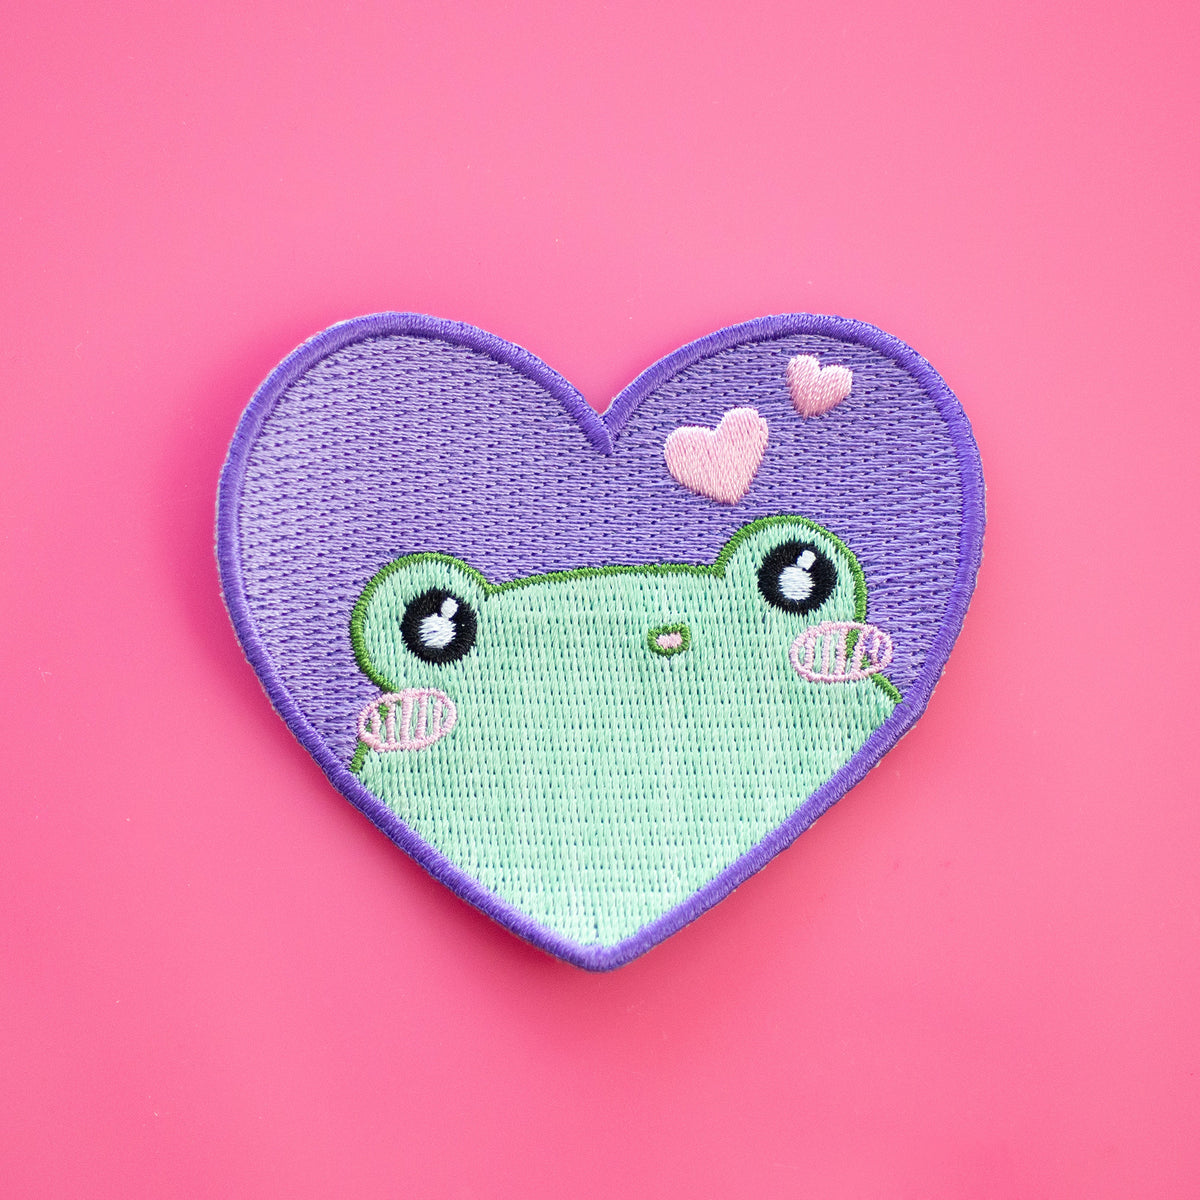 Bored Candy Heart Patch - Iron On